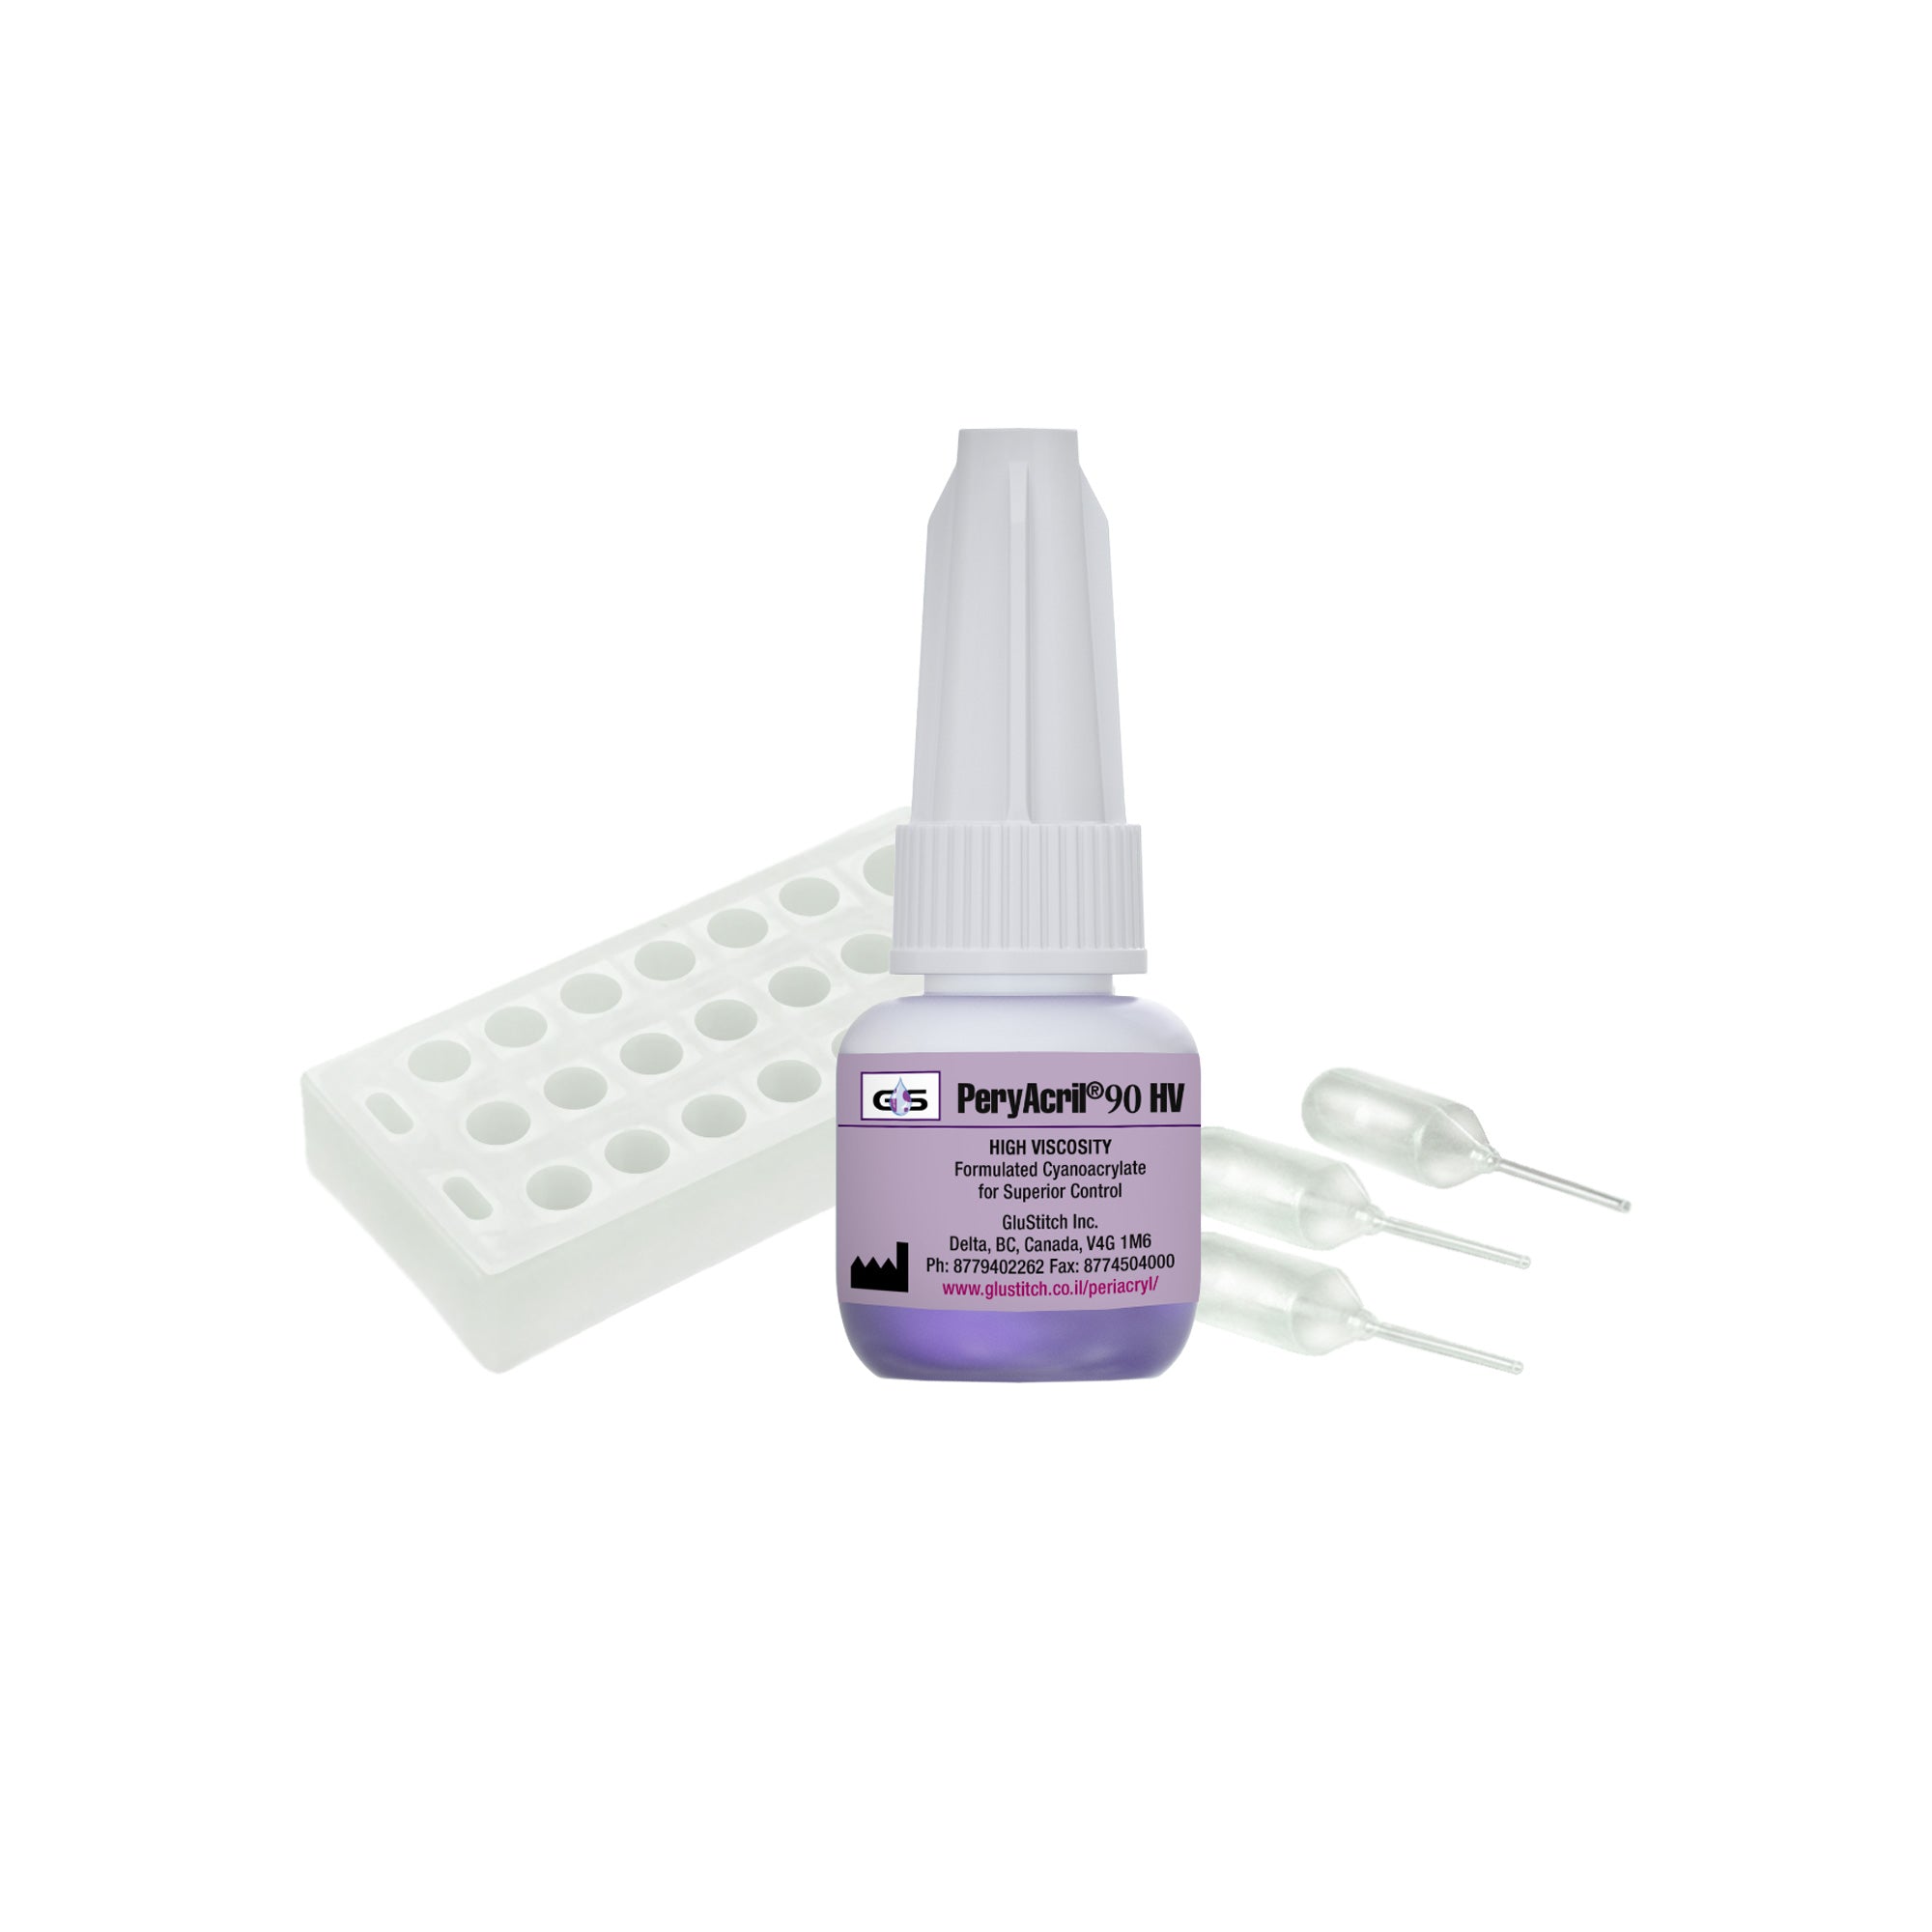 Periacryl 90 HV Surgical Oral Tissue Adhesive With High Viscosity